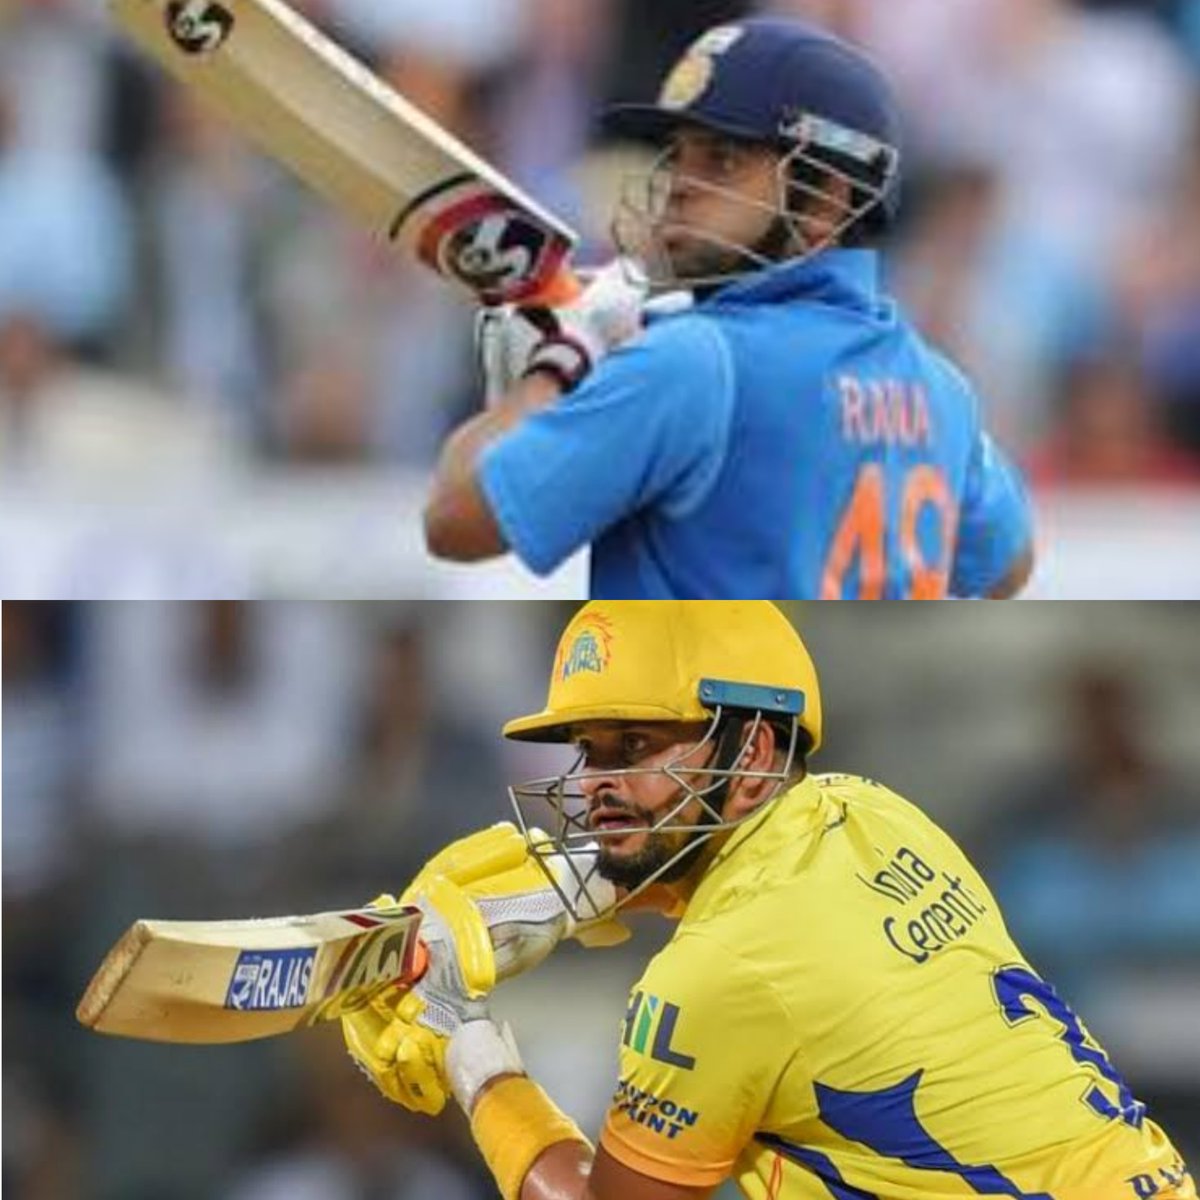 A few coincidence pics of  @ImRaina In blue & in yellowFollow this thread (Don't forget to share ur views)